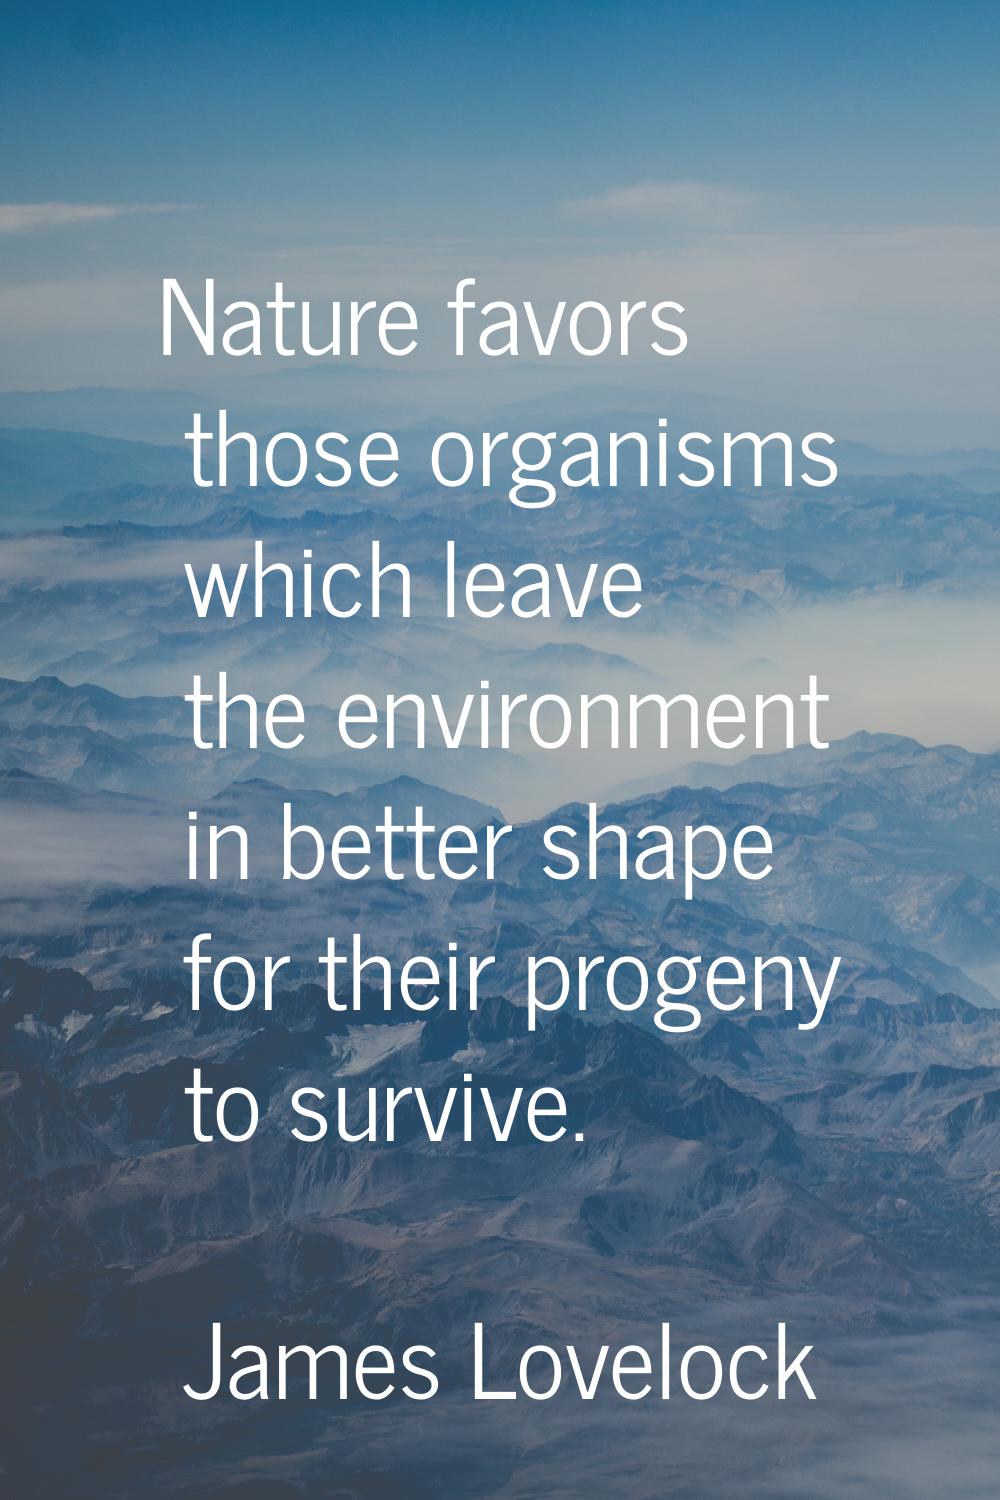 Nature favors those organisms which leave the environment in better shape for their progeny to surv